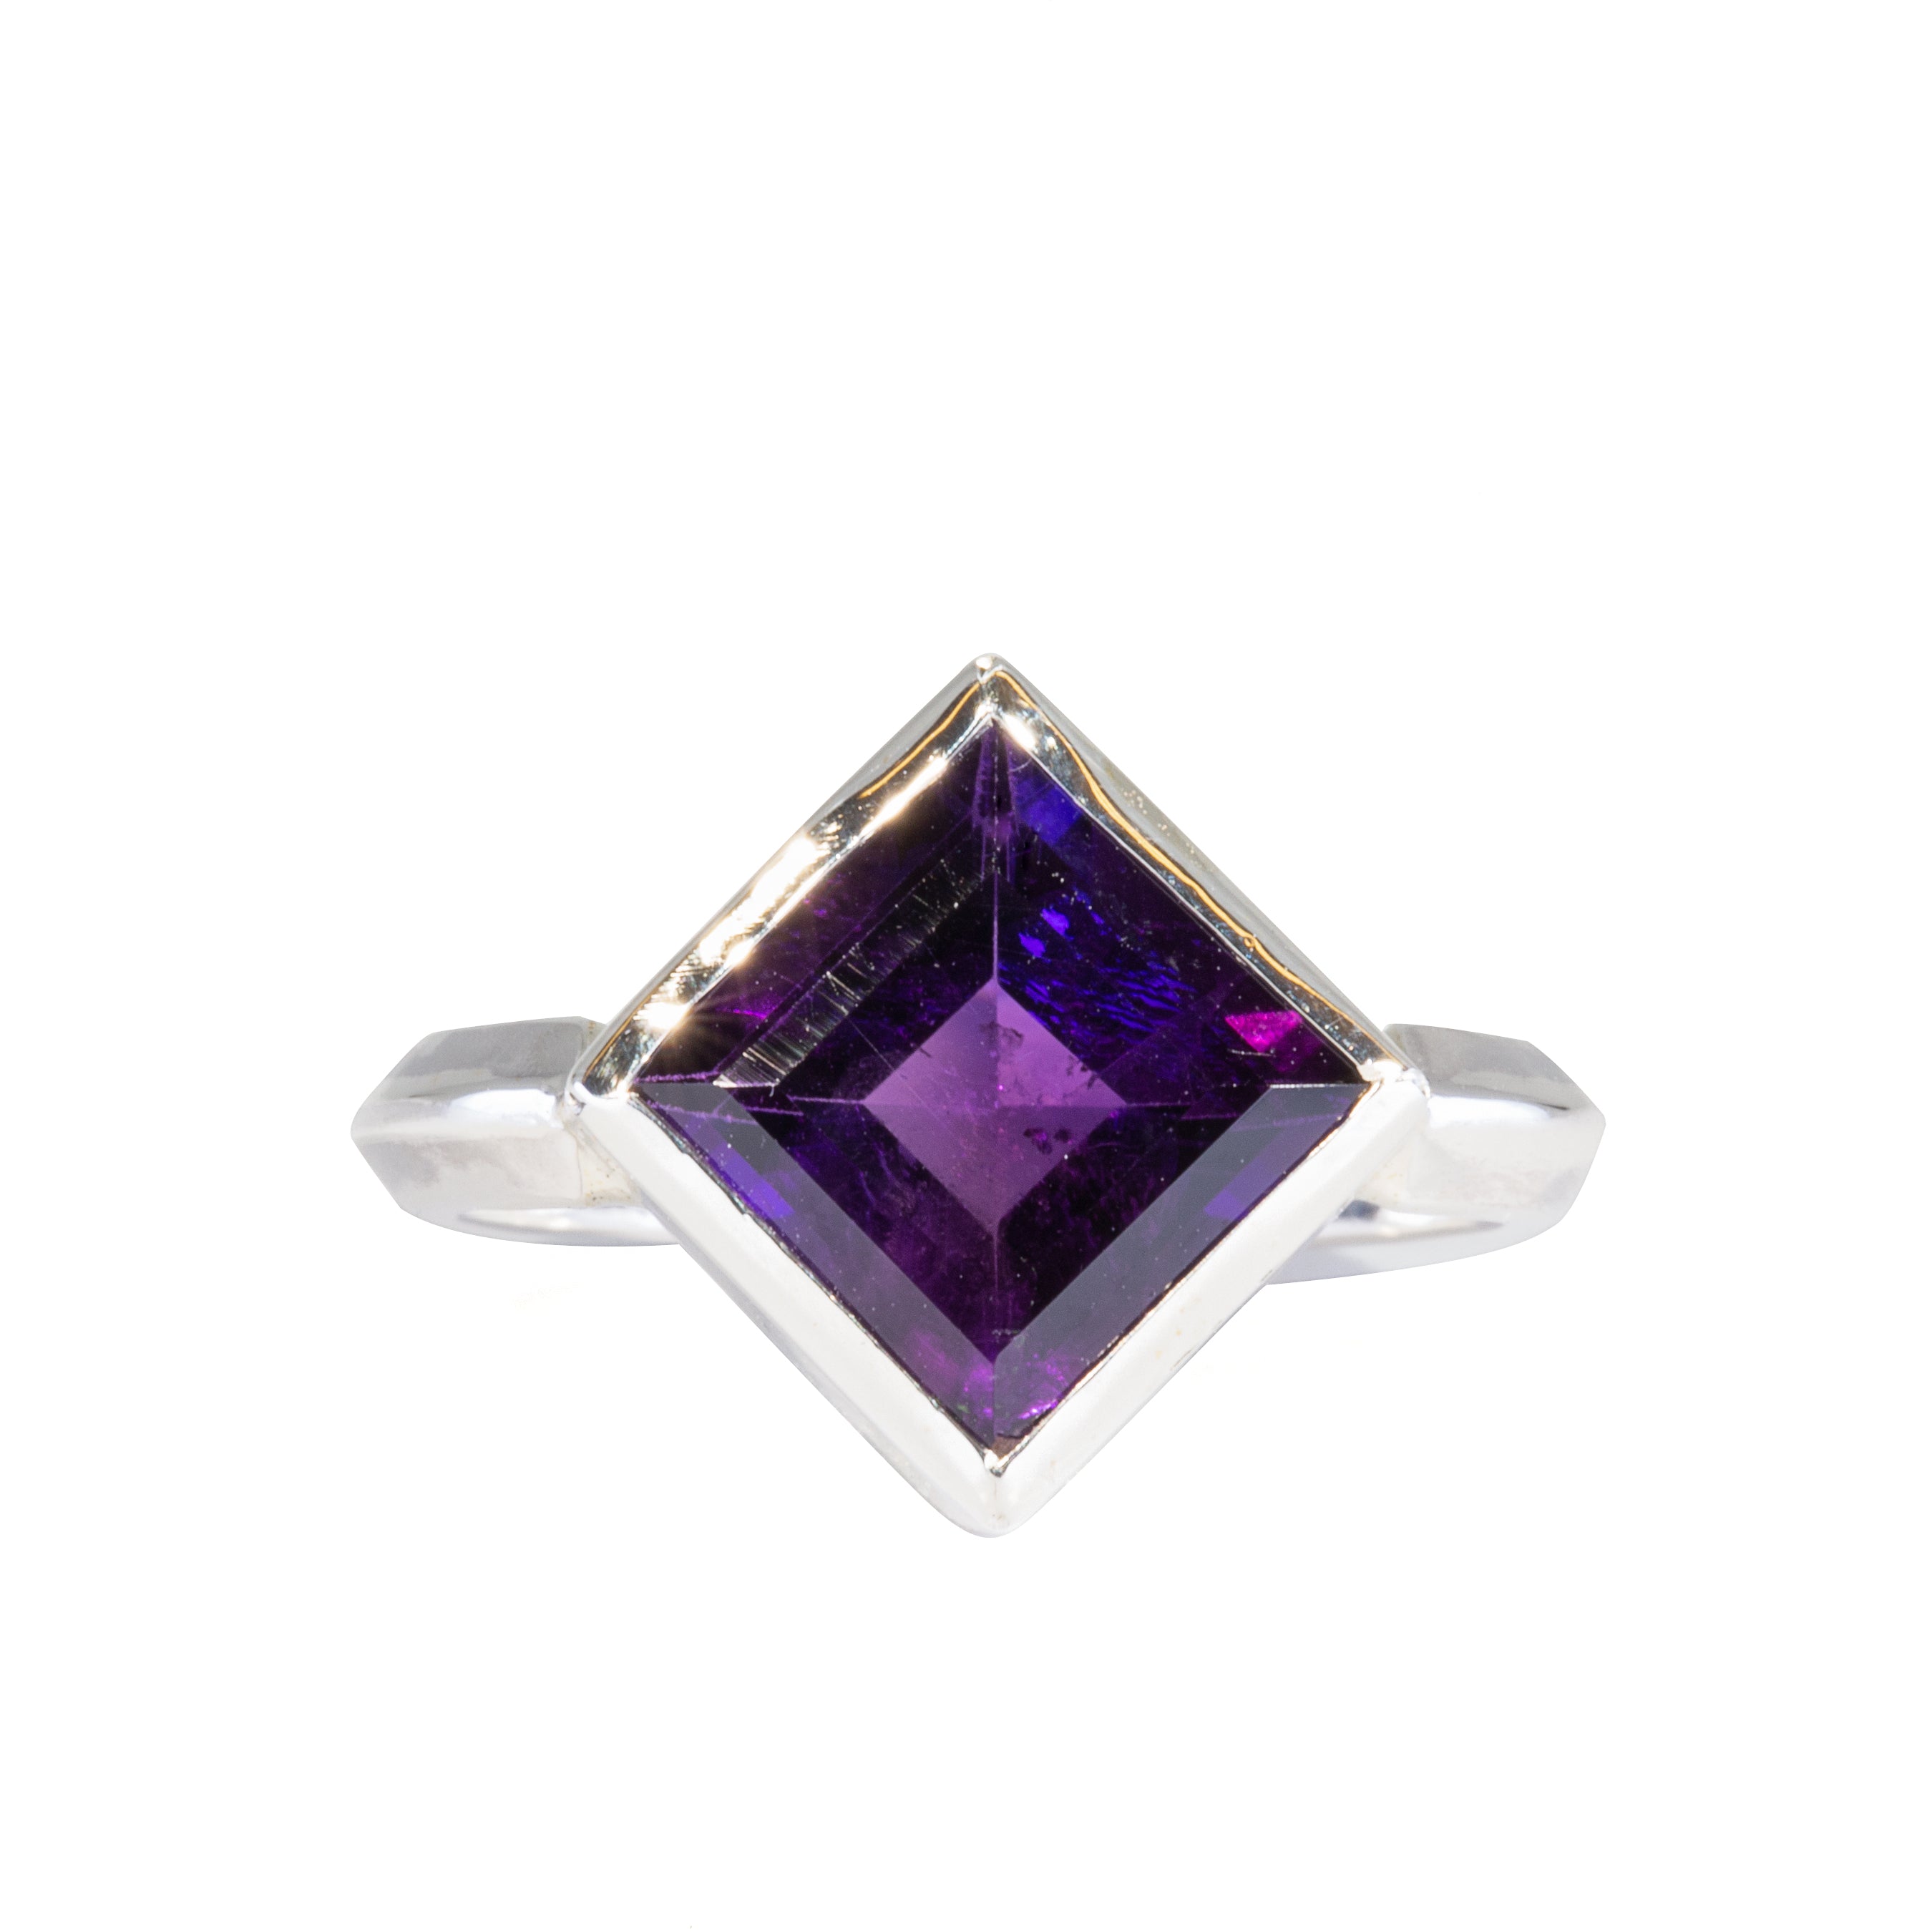 Amethyst 5.18 Carat Square Faceted Sterling Silver Handcrafted Gemstone Ring - JJO-118 - Crystalarium